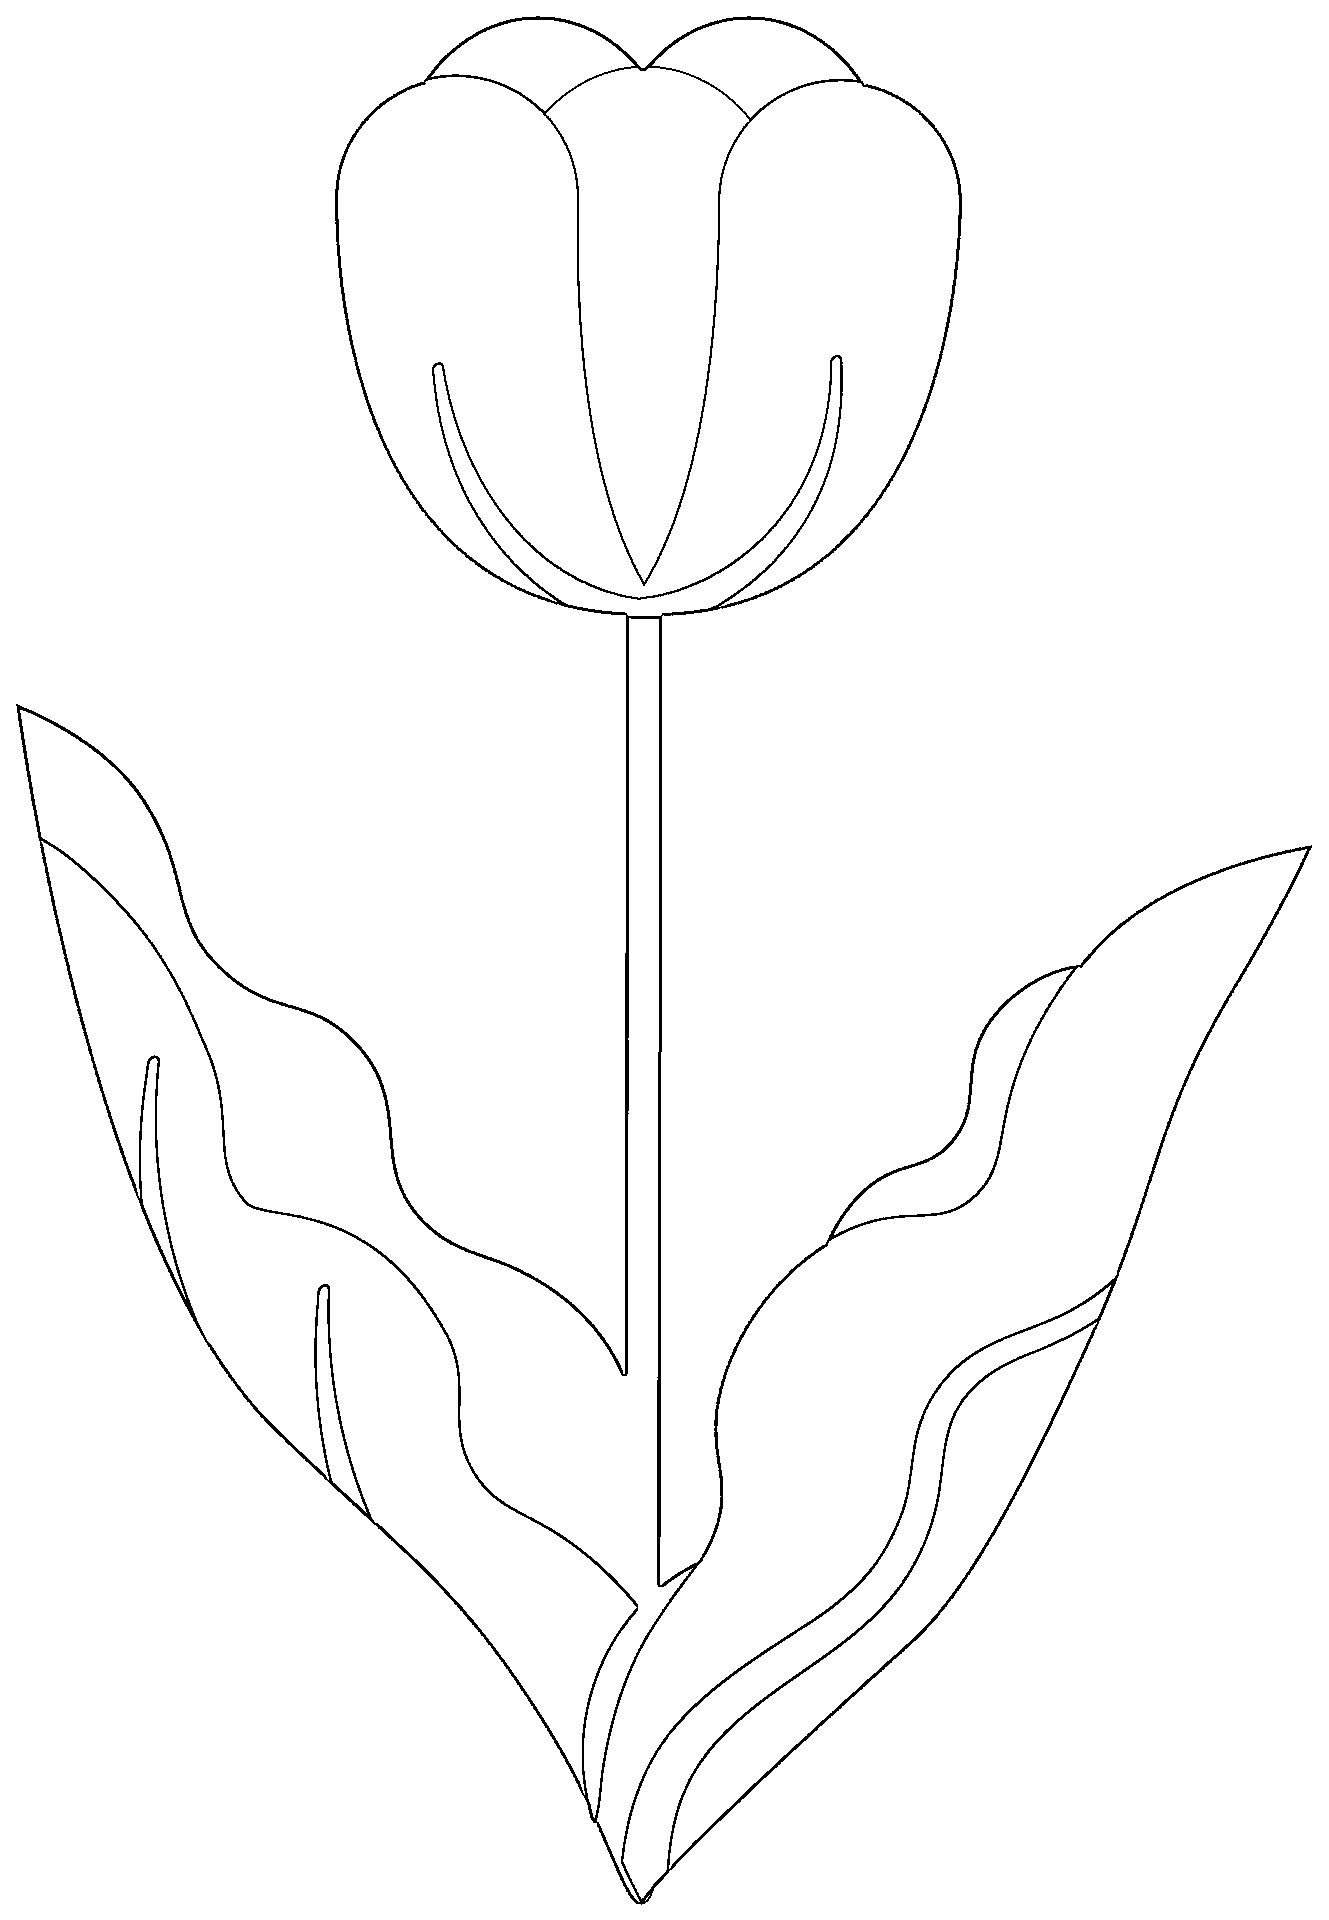 Printable tulip clipart black and white Coloring Page for kids.